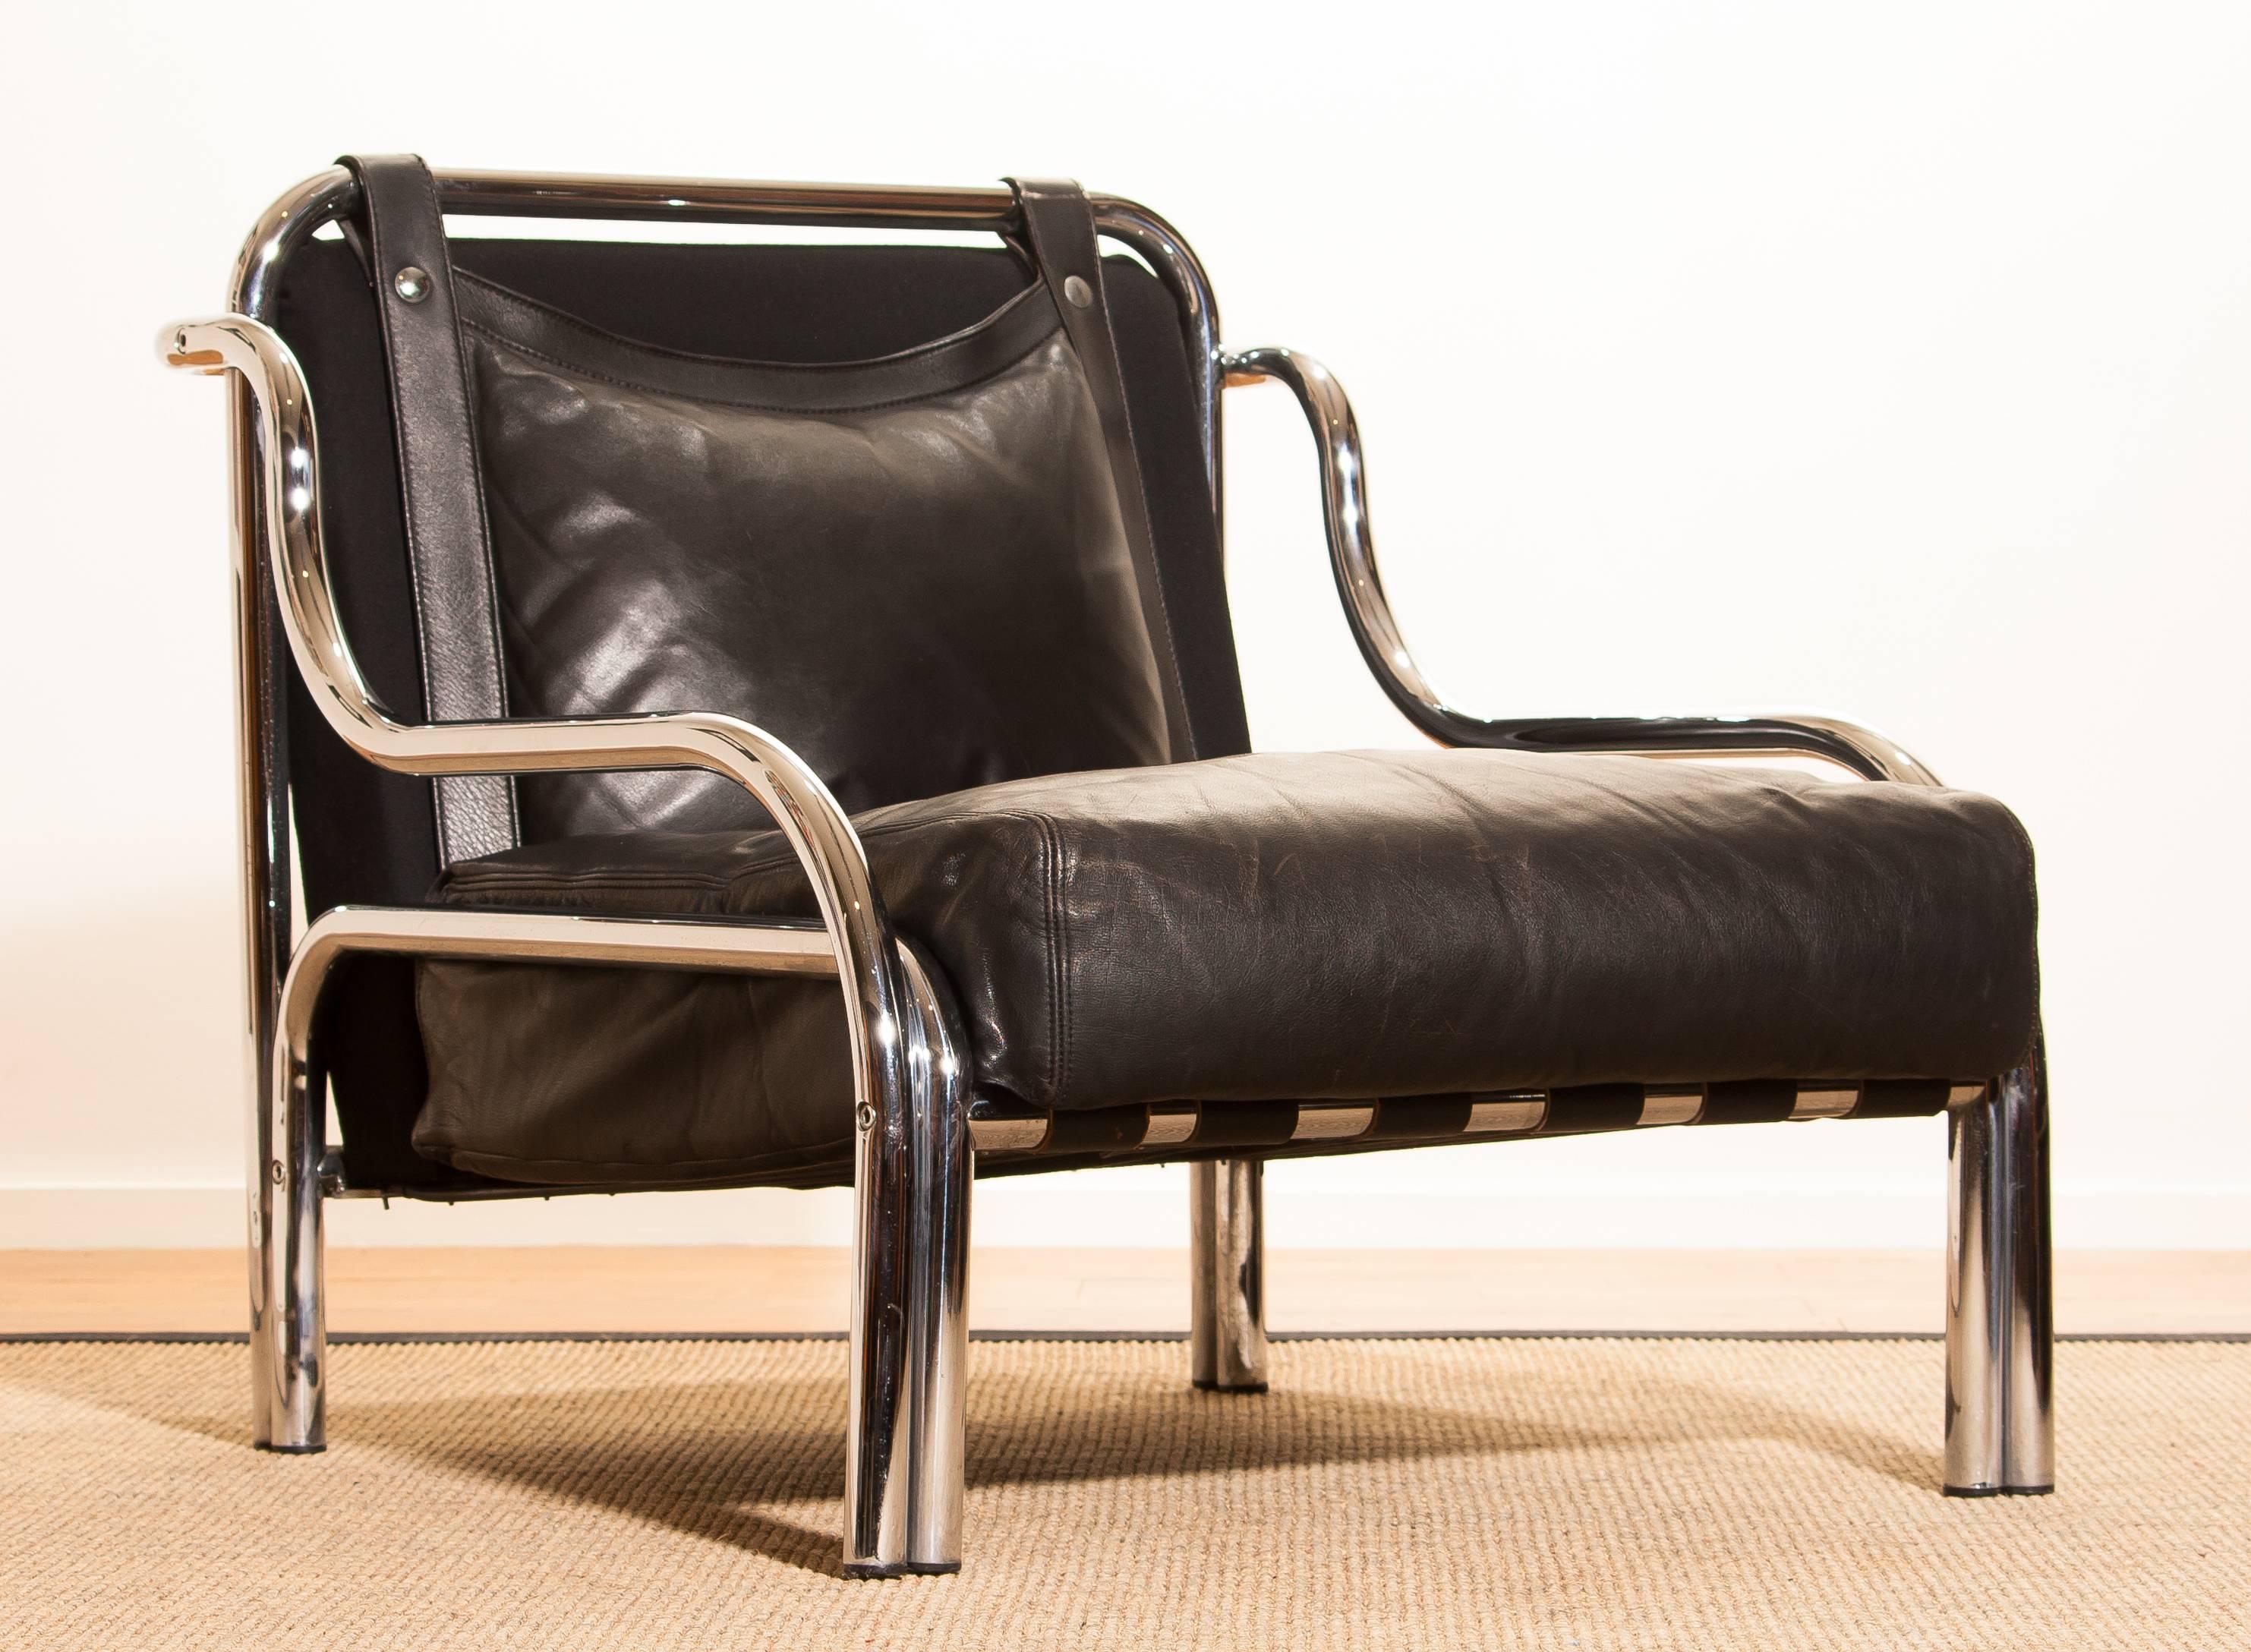 Wonderful lounge set designed by Gae Aulenti for Poltronova Italy.
This beautiful set consists of a sofa and chair made of a black leather seating on a chromed frame.
It is in an excellent condition.
Period 1960s
Dimensions sofa H.73 cm, W.130